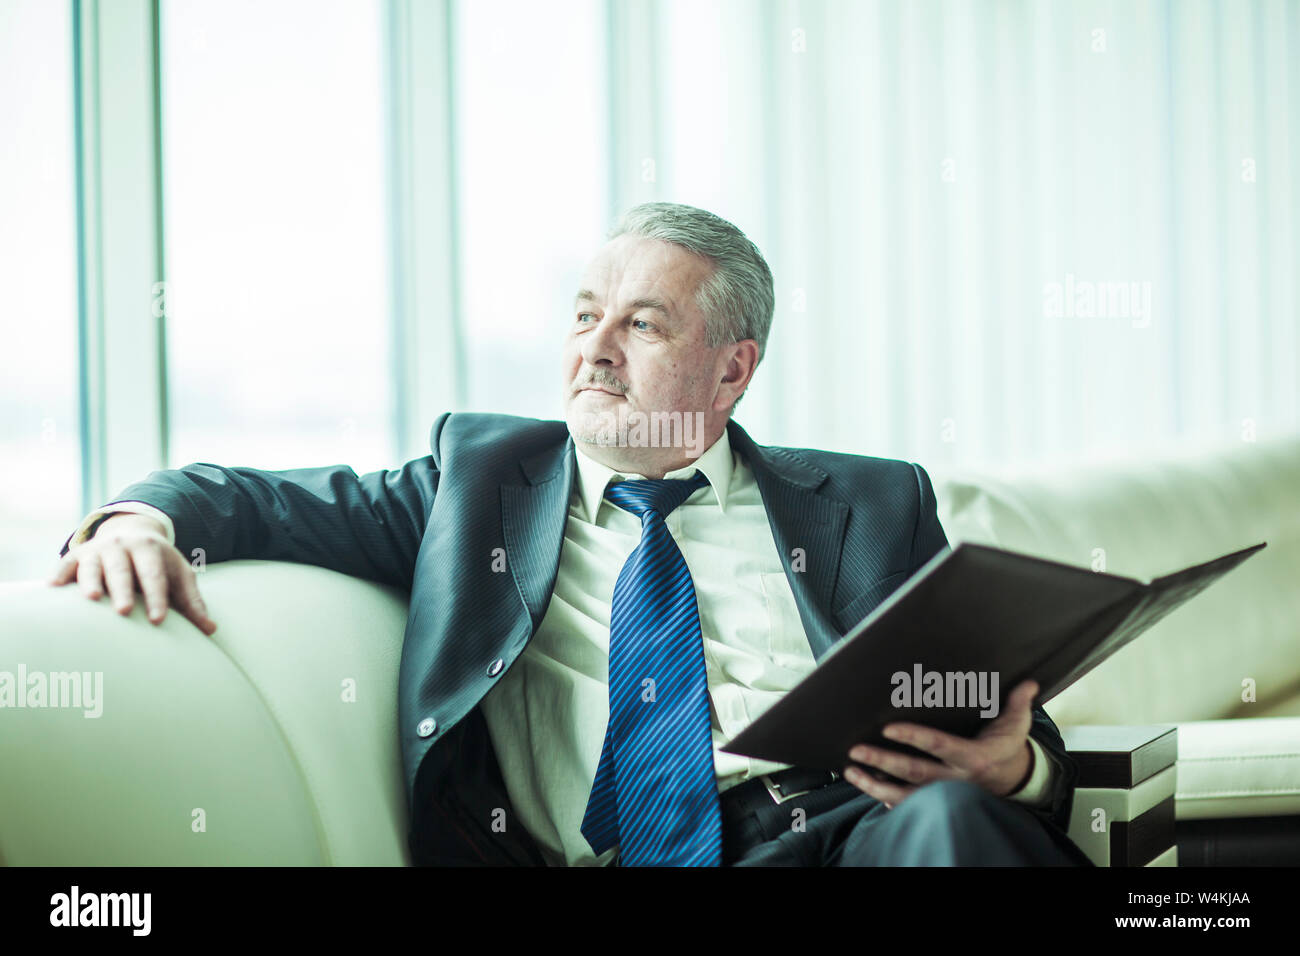 successful businessman with business documents sitting on a sofa in a private office Stock Photo